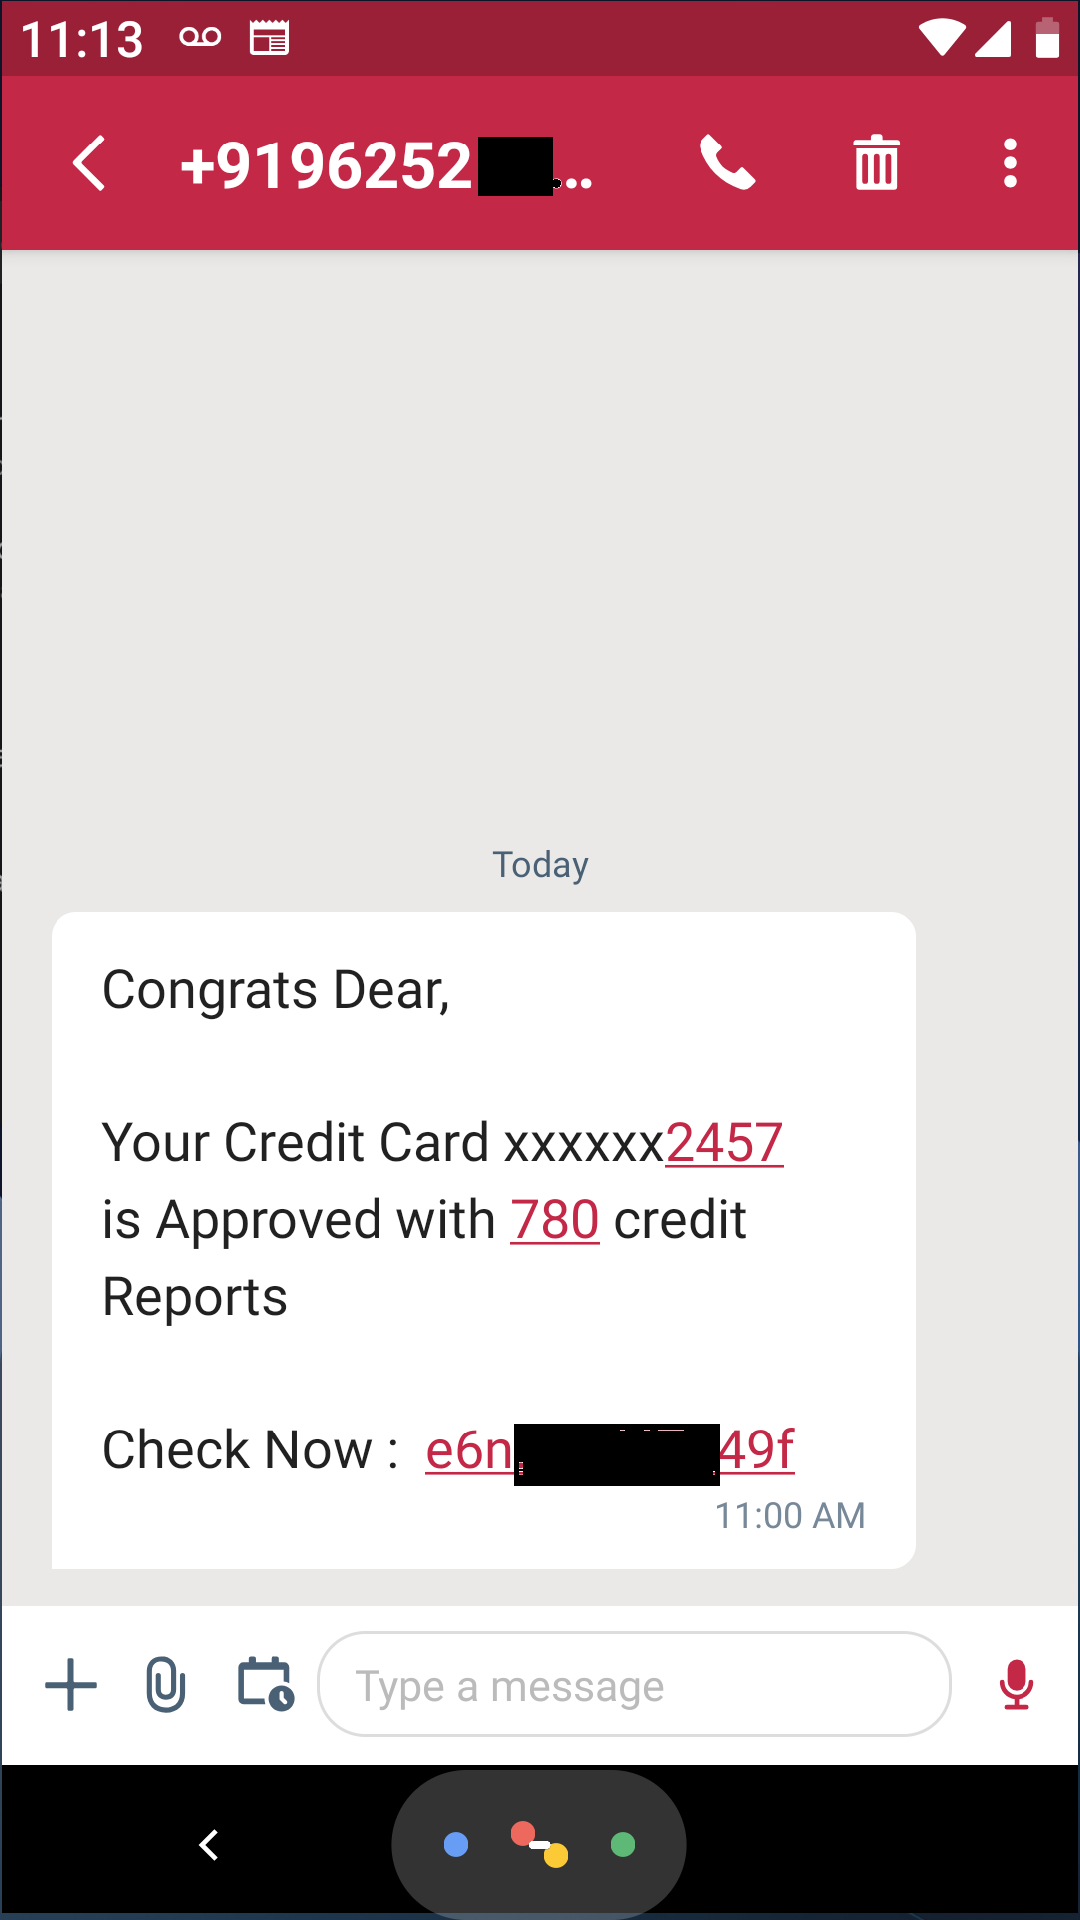 Classic phishing attack to gather your financial details